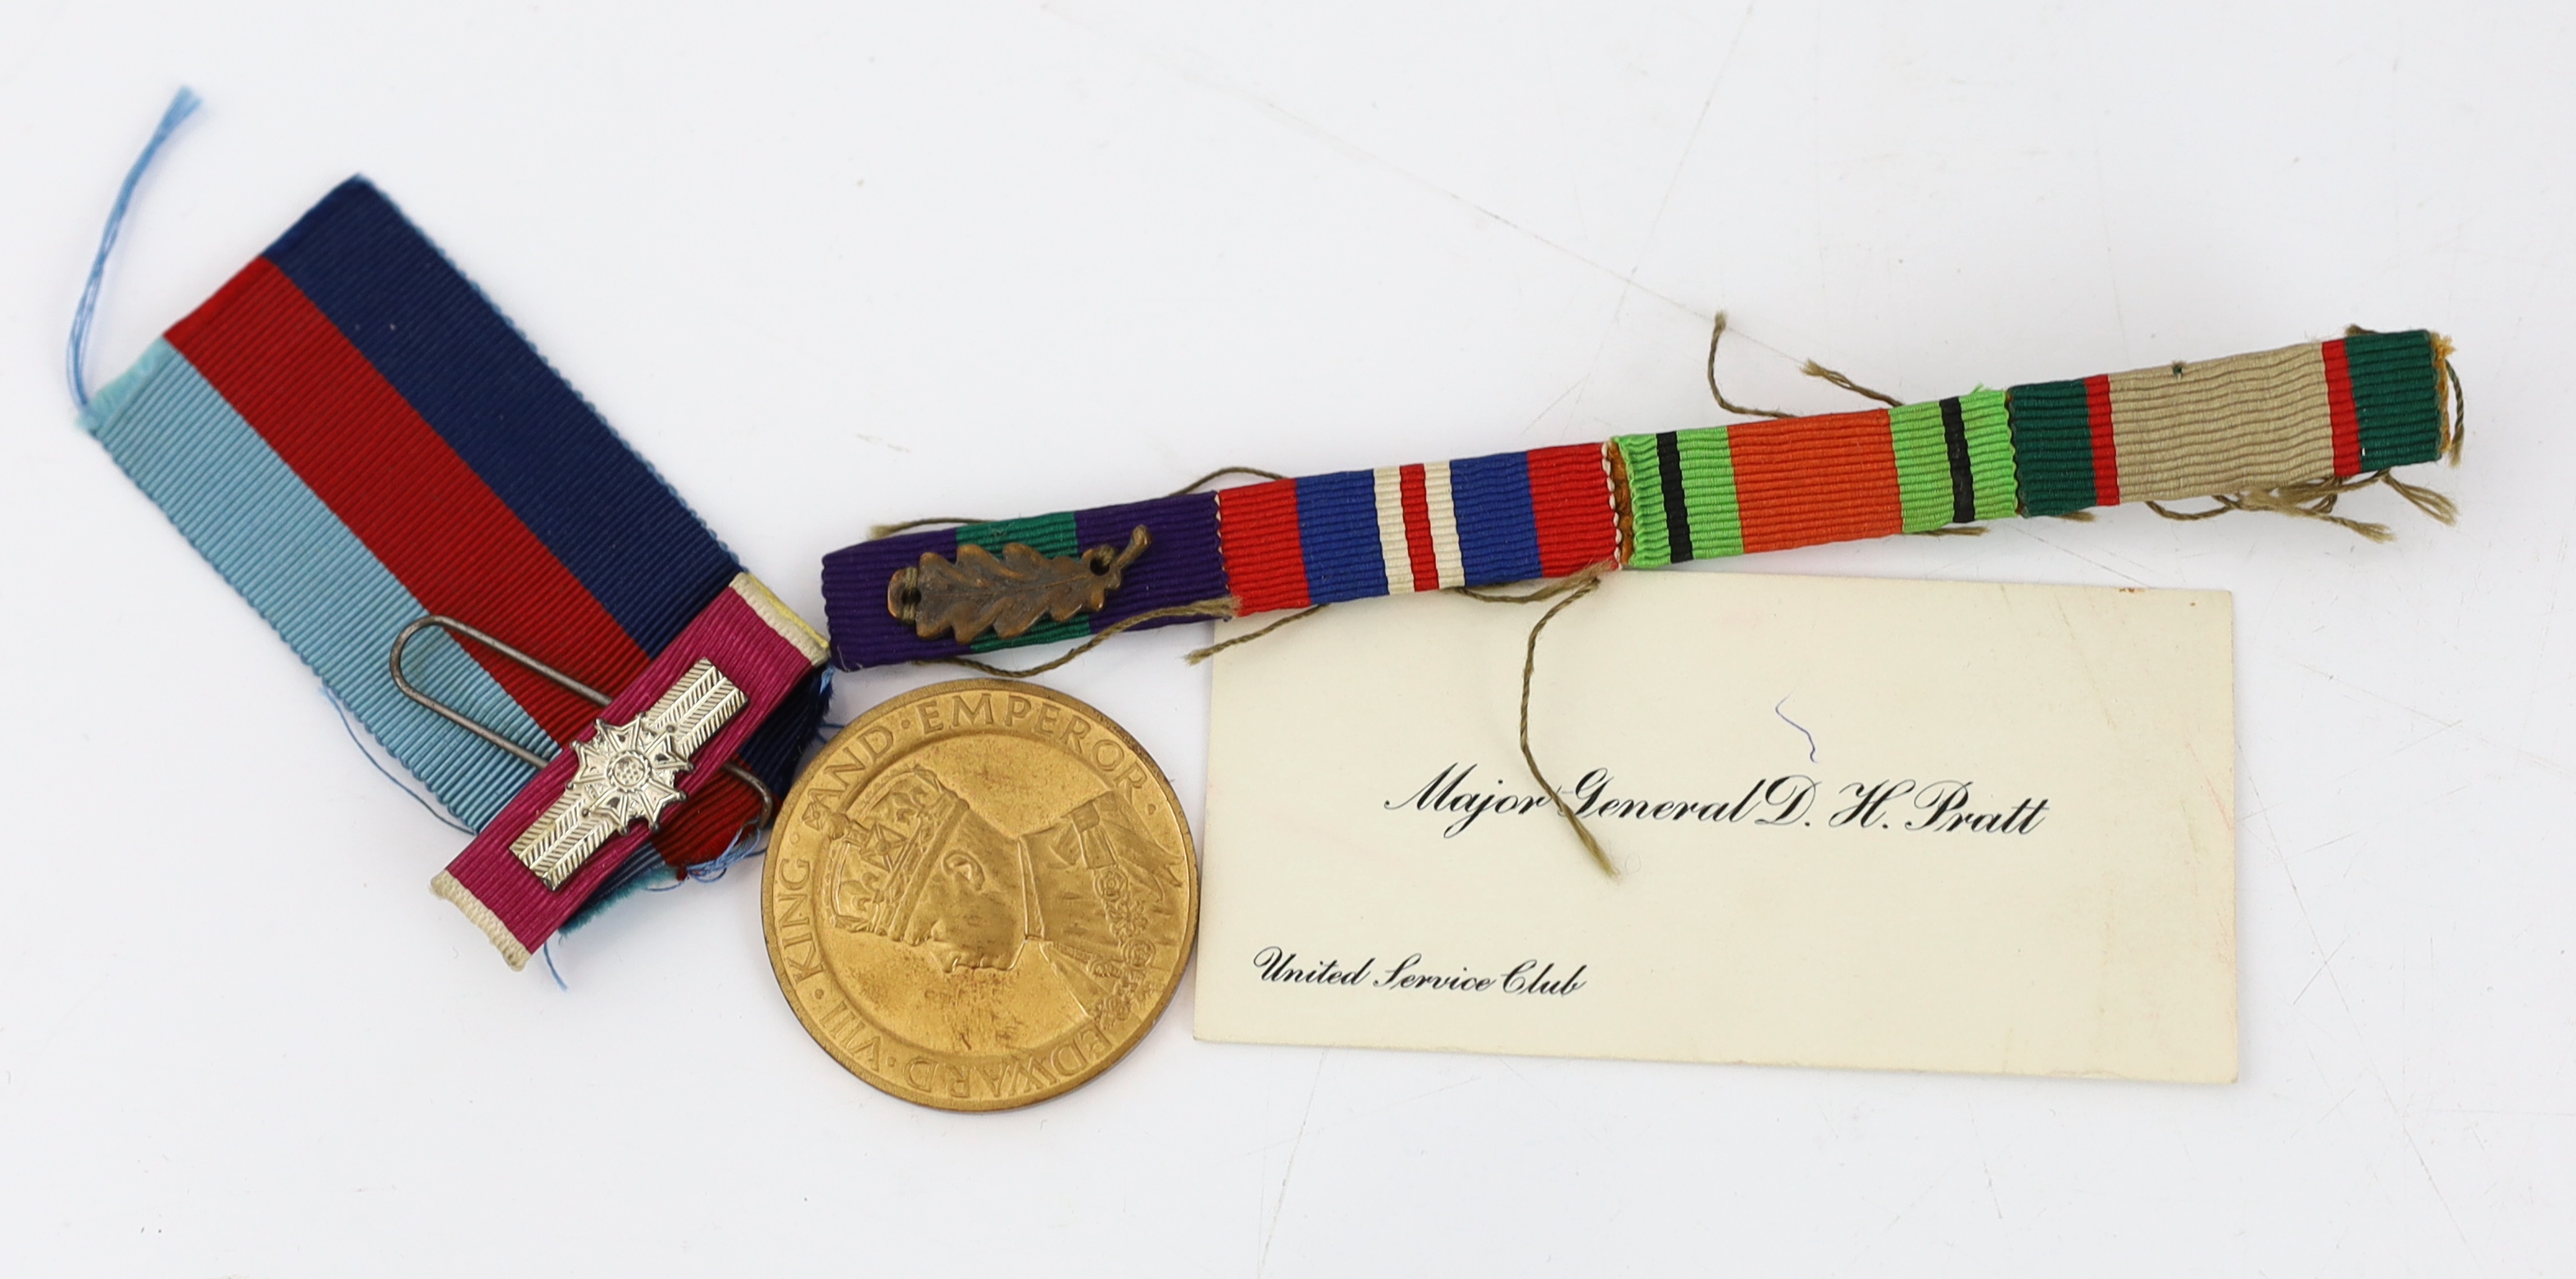 A DSO, MC medal group awarded to Major General Douglas Henry Pratt (1892-1958) of the Royal Irish Regiment, promoted towards the end of his career to Major General, as liaison in Washington D.C. where he oversaw upgrades